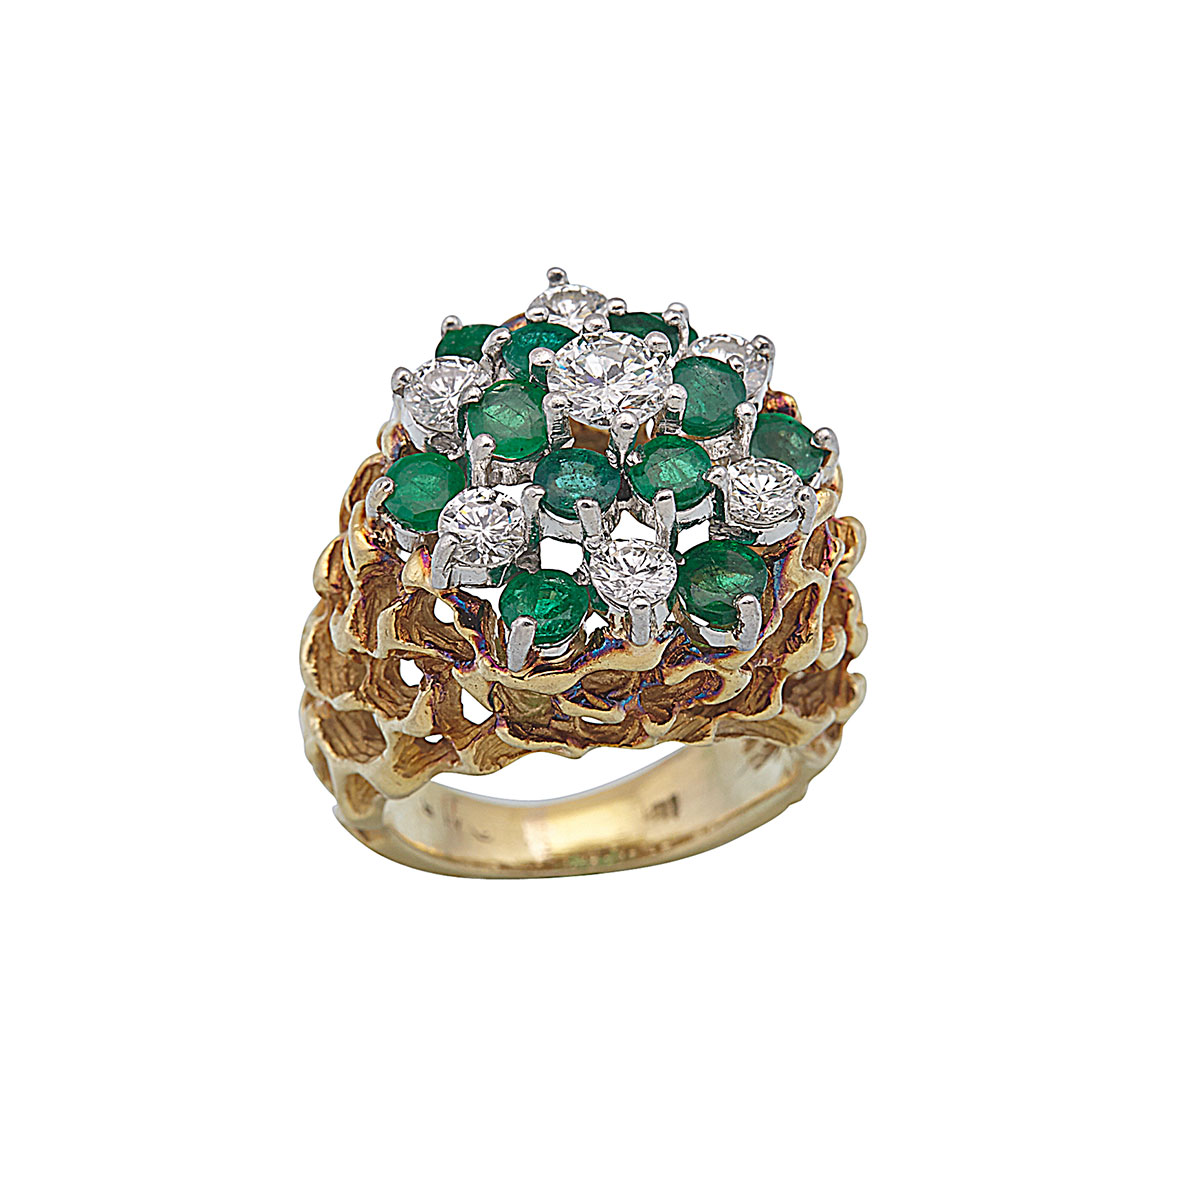 18K YELLOW GOLD RING set with 7 brilliant cut diamonds (approx. 1.05ct.t.w.) and 12 full cut